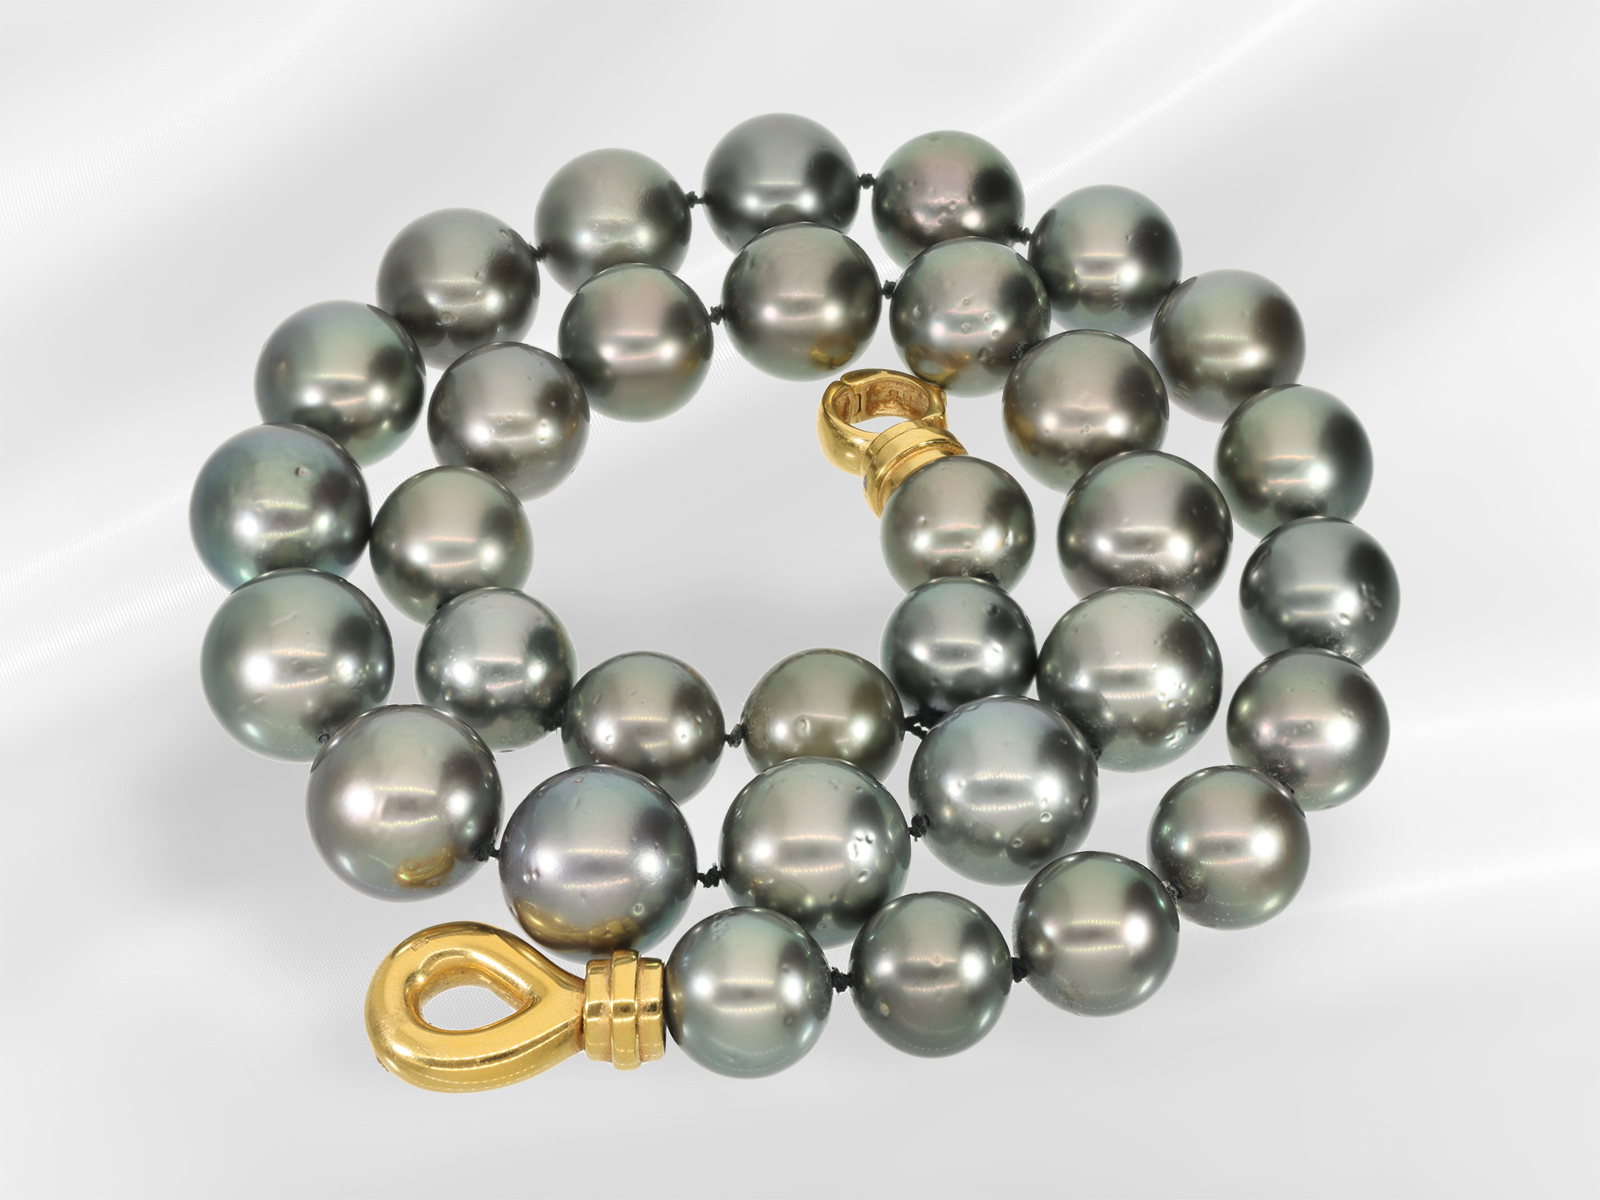 Necklace: formerly very expensive Tahitian pearl necklace 12-15mm!, original price approx. 13,000€,  - Image 2 of 6